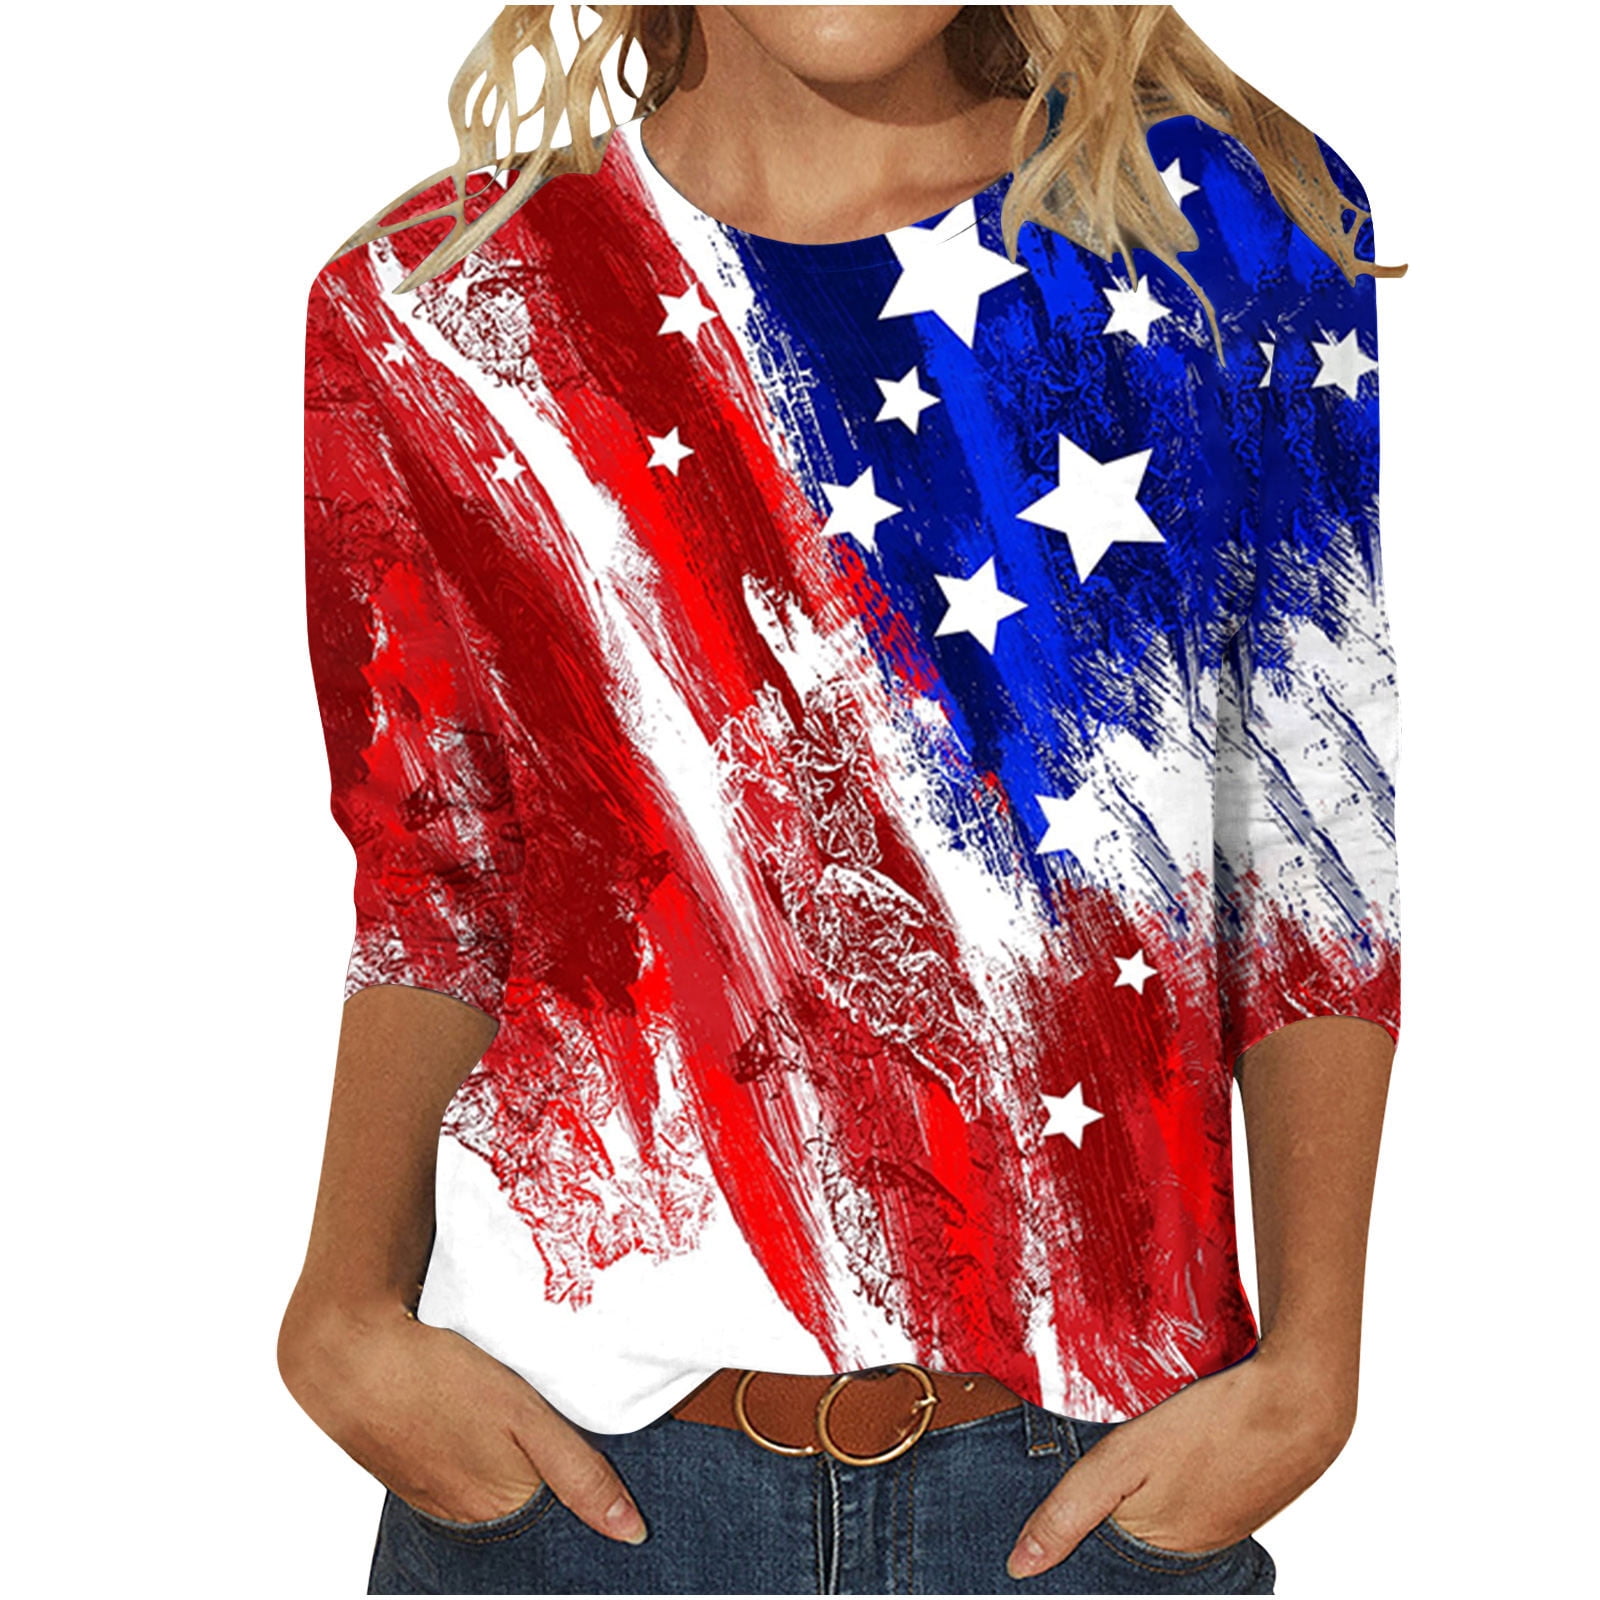 Women's Summer American Flag Patriotic T Shirts Casual Holiday 3/4 ...